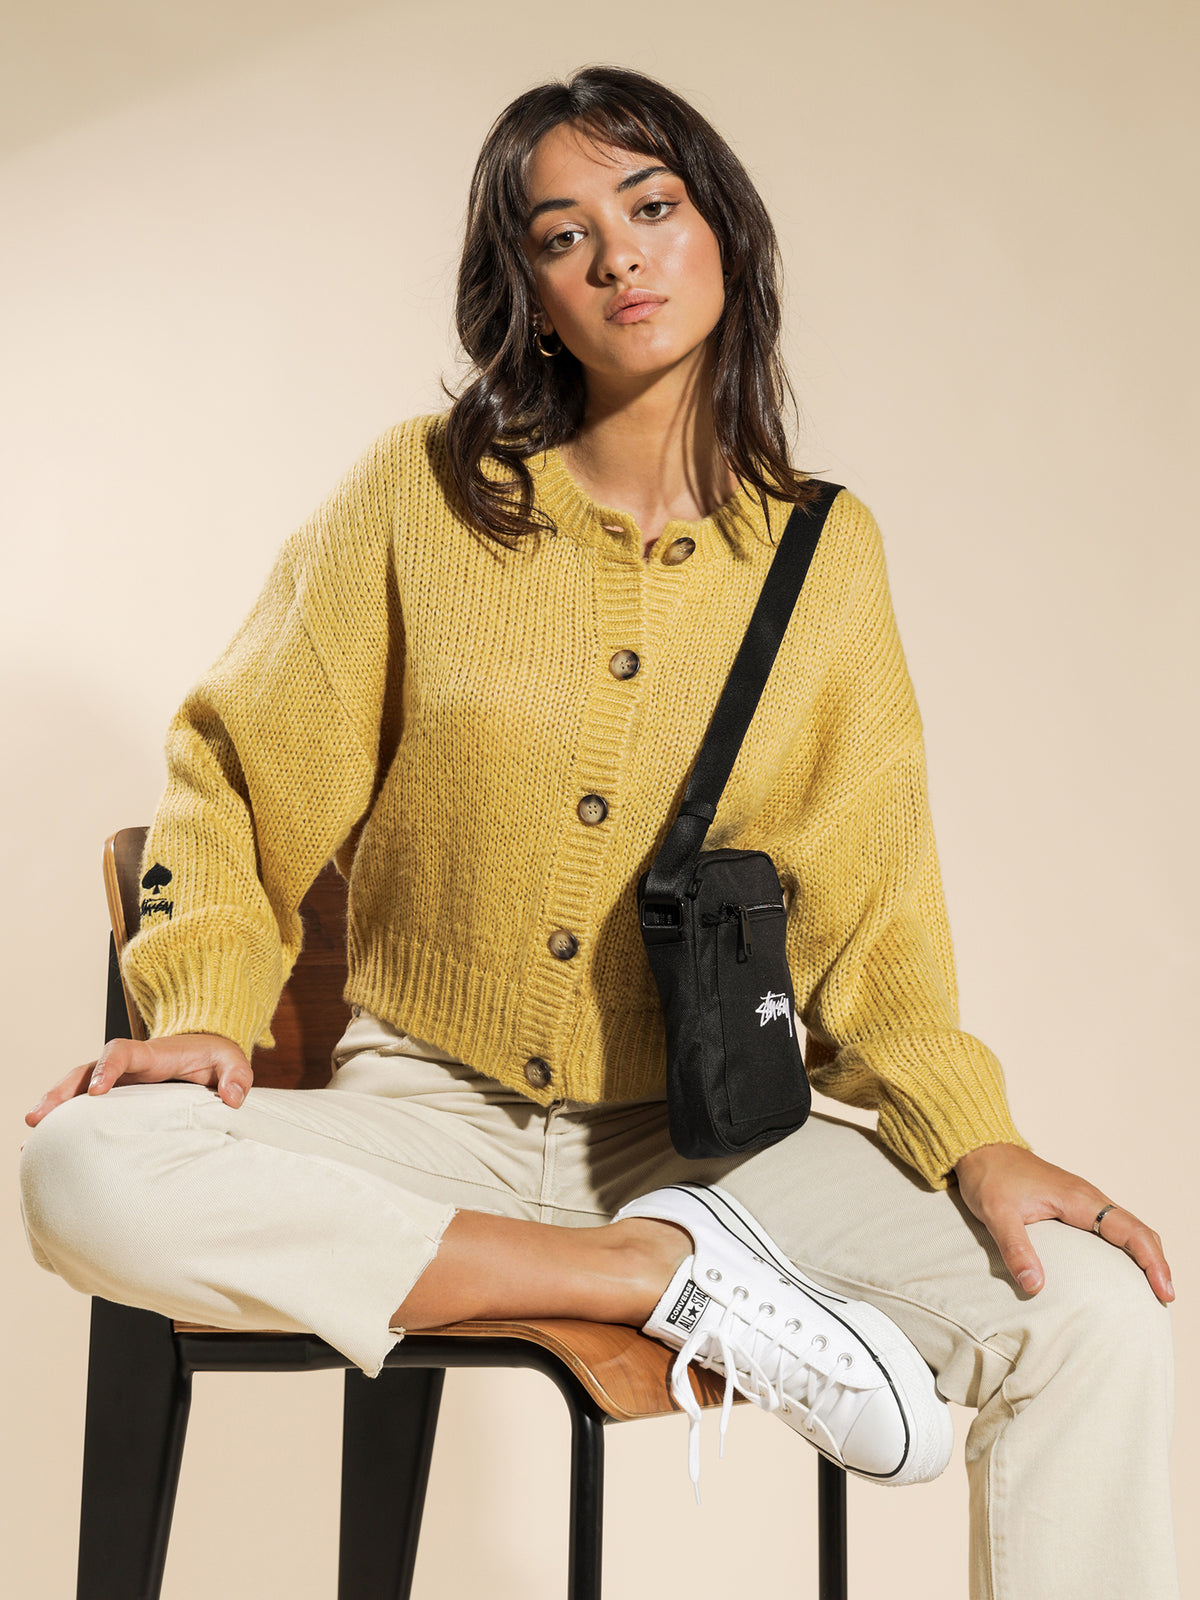 Mable Button Up Cardi in Butter